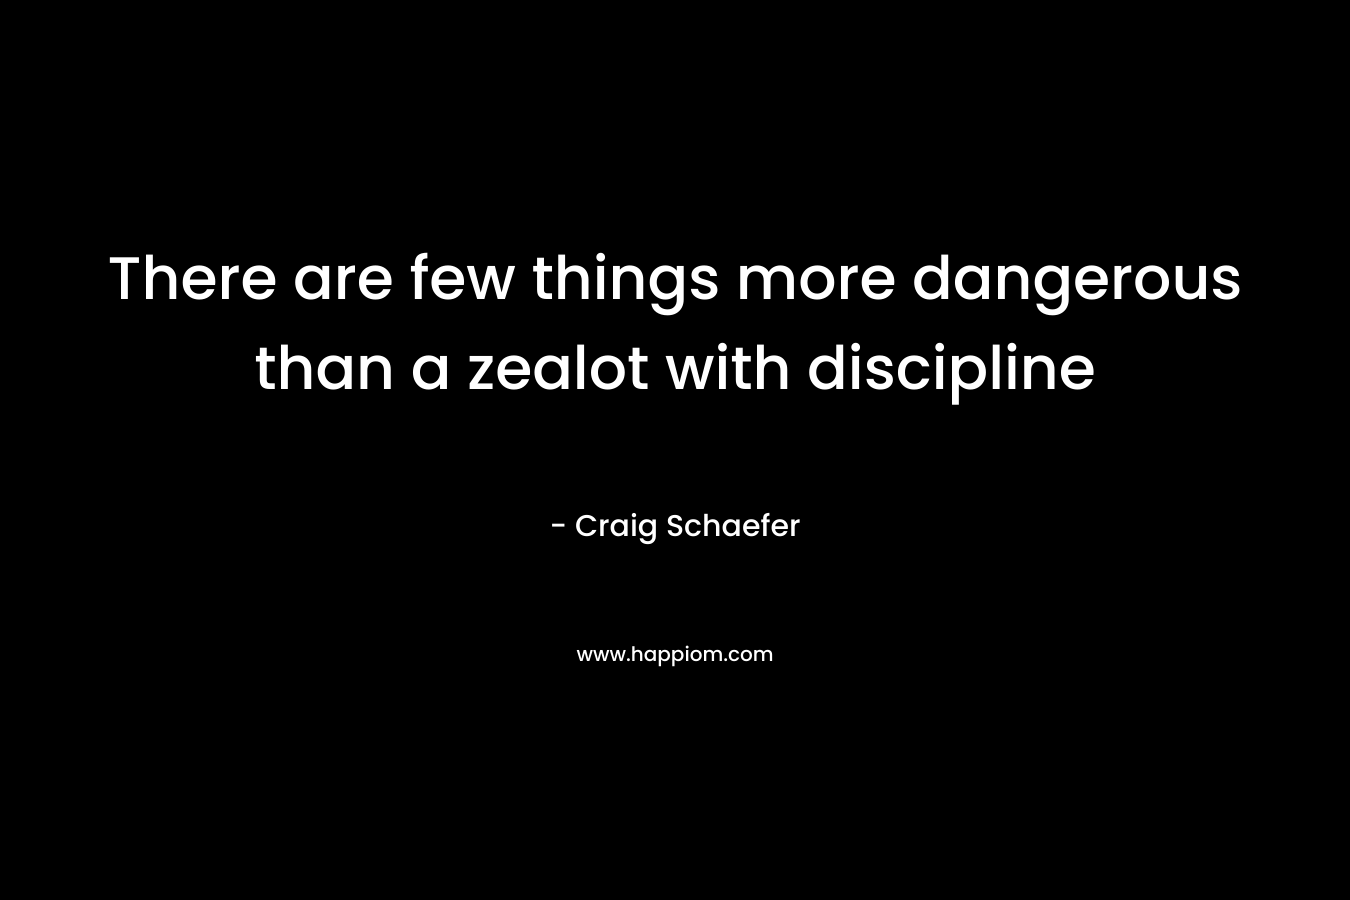 There are few things more dangerous than a zealot with discipline – Craig Schaefer